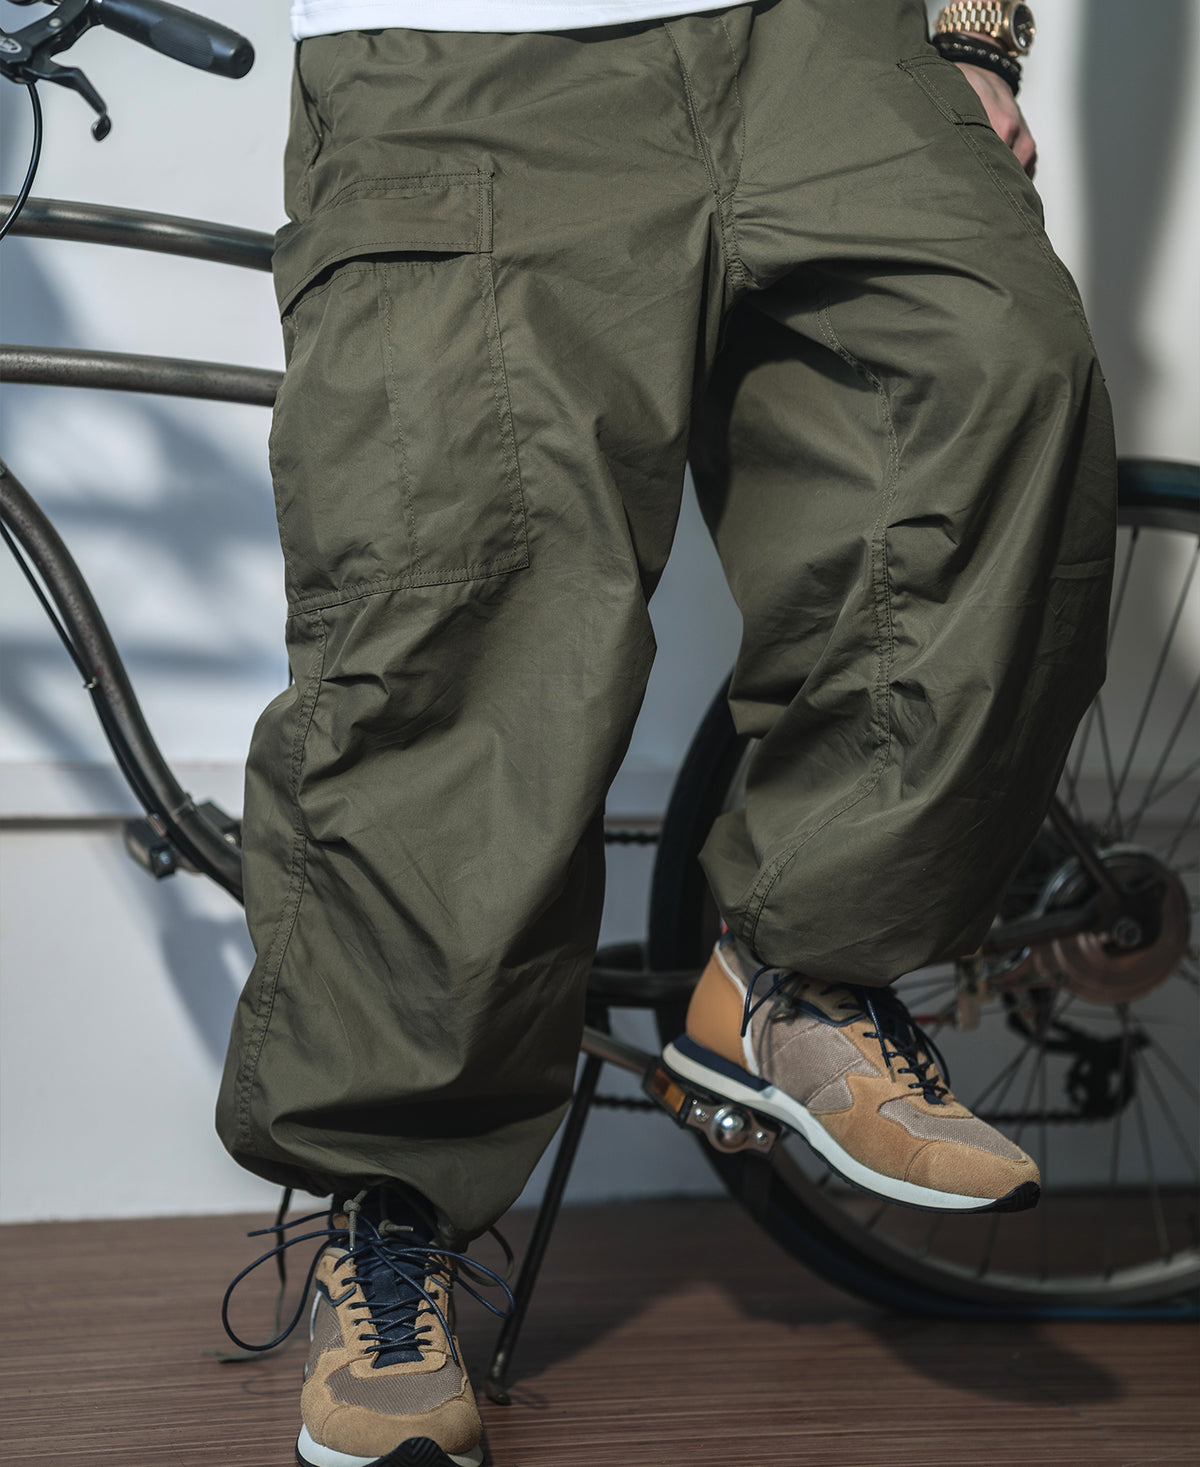 US Army M-1951 Arctic Trouser - Shell